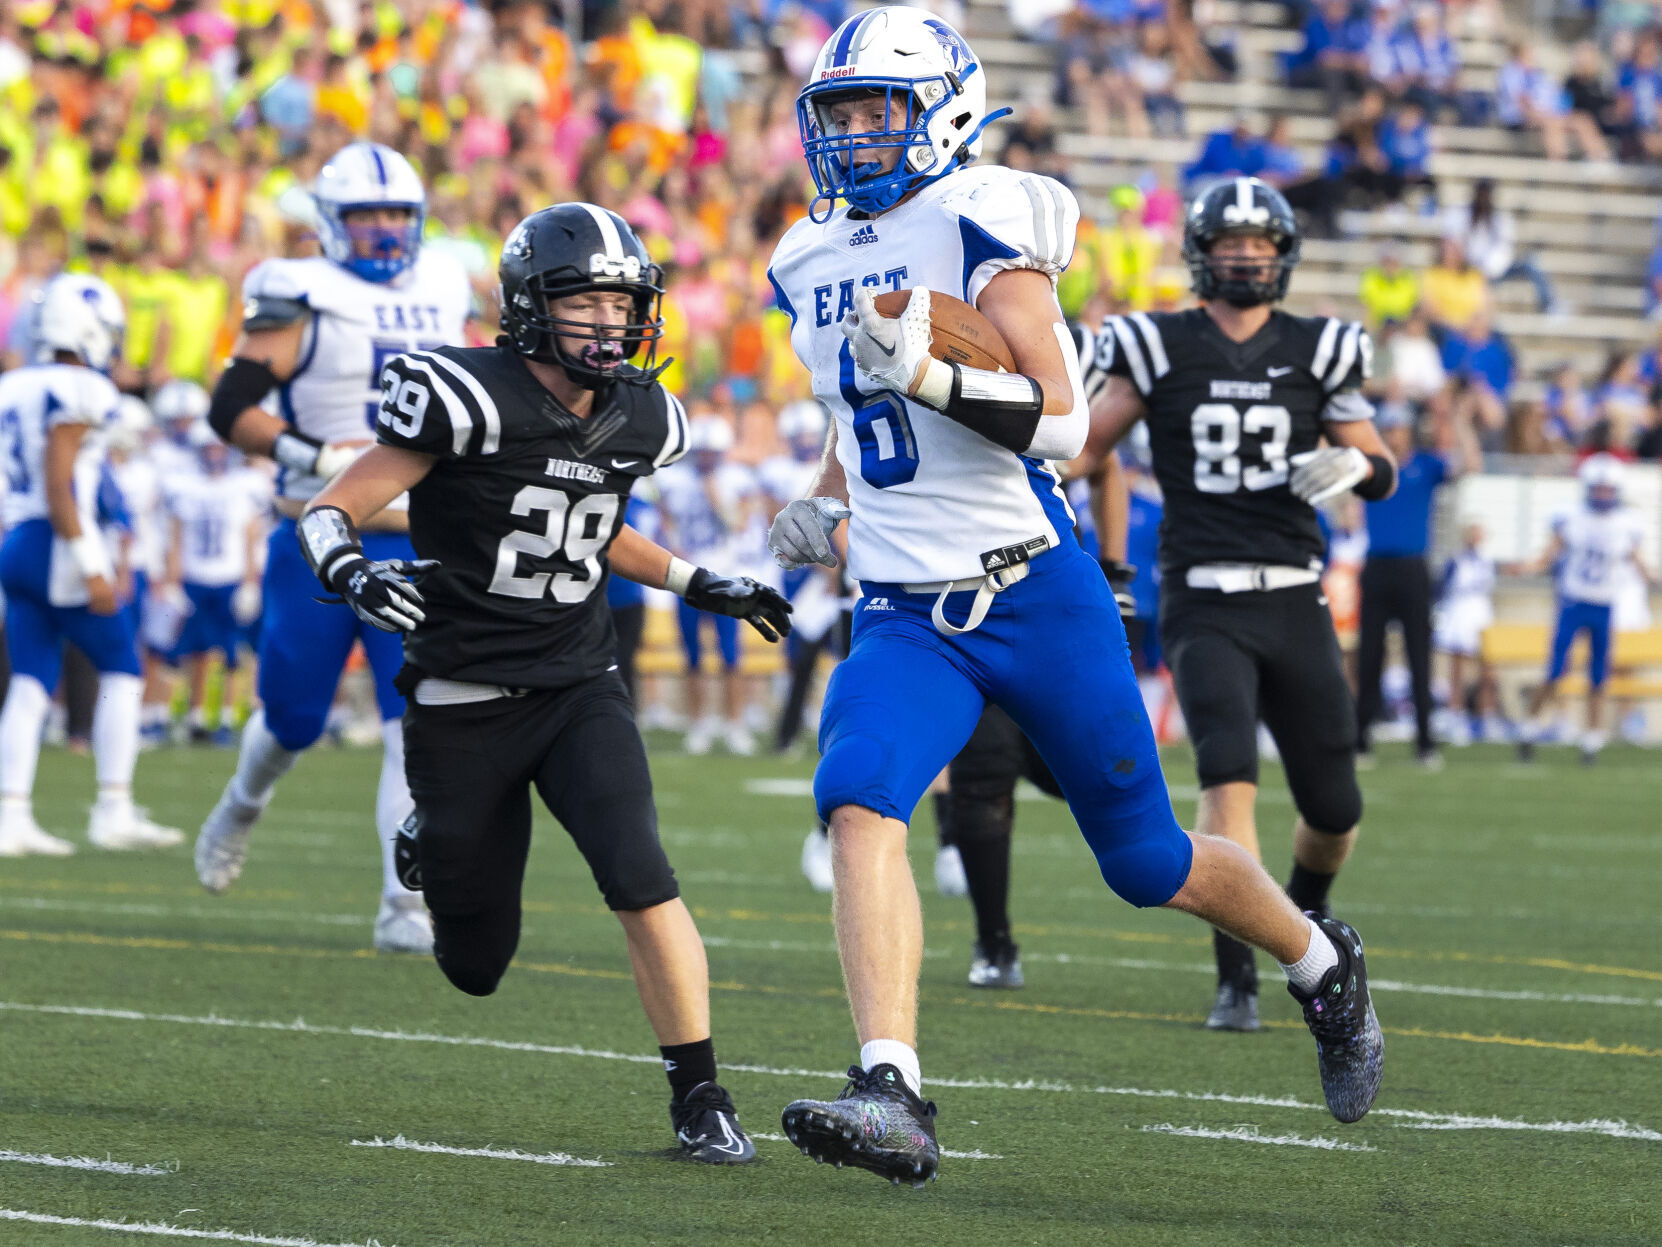 Lincoln East dominates Lincoln Northeast in a 42-7 victory